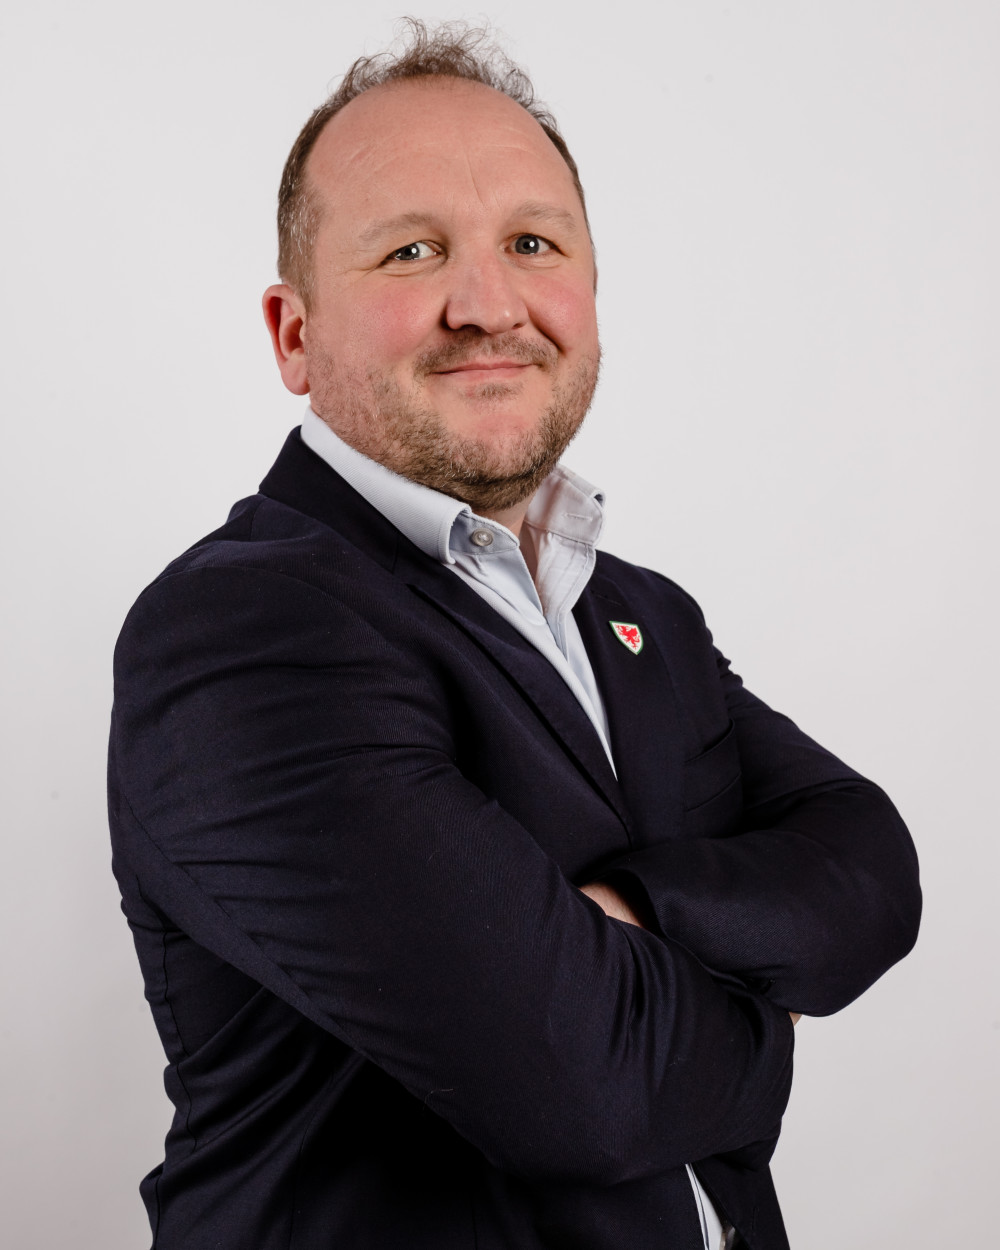 Andrew Howard will take over as CEO of the Welsh Sports Association in August 2022. (Image credit: Brandrocker)